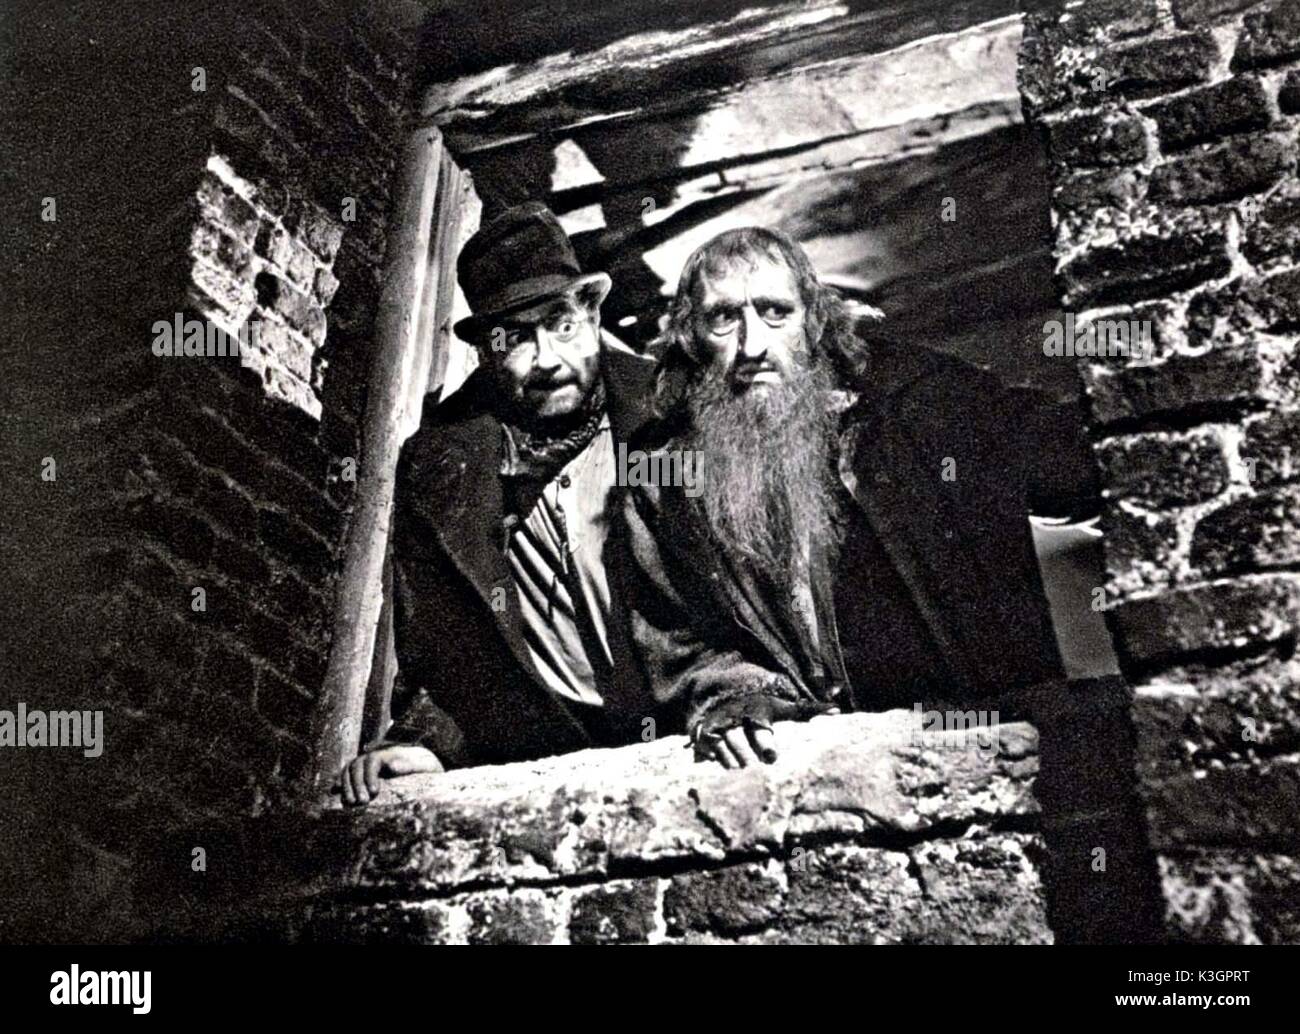 OLIVER TWIST ROBERT NEWTON as Bill Sikes ALEC GUINNESS as Fagin are trapped in their secret hideout OLIVER TWIST     Date: 1948 Stock Photo